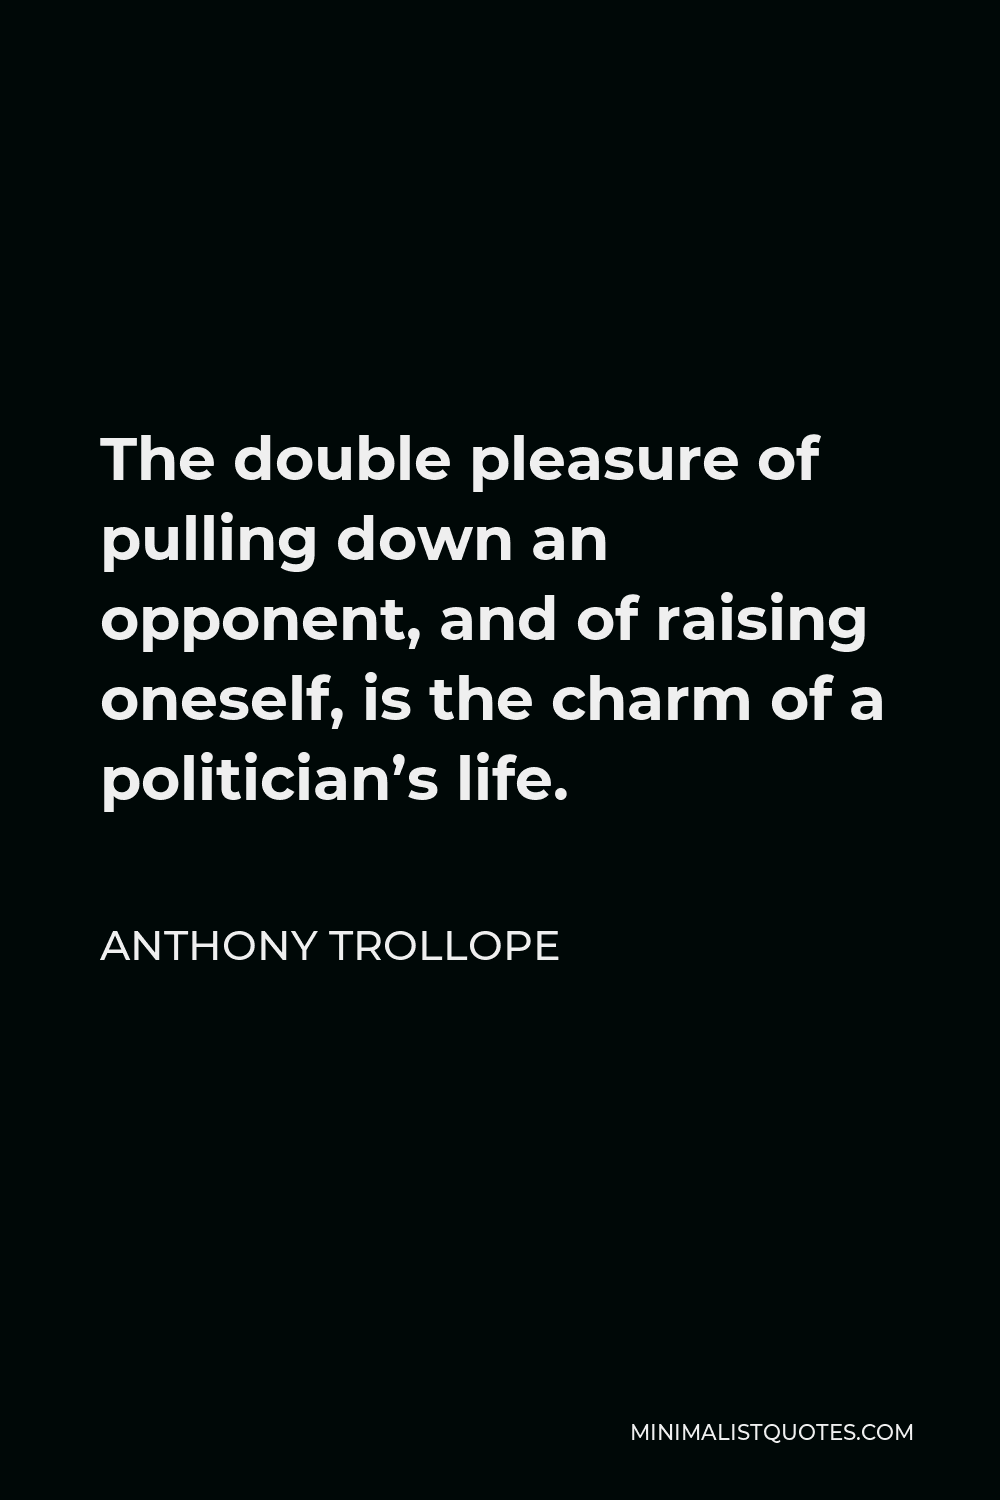 Anthony Trollope Quote - The double pleasure of pulling down an opponent, and of raising oneself, is the charm of a politician’s life.